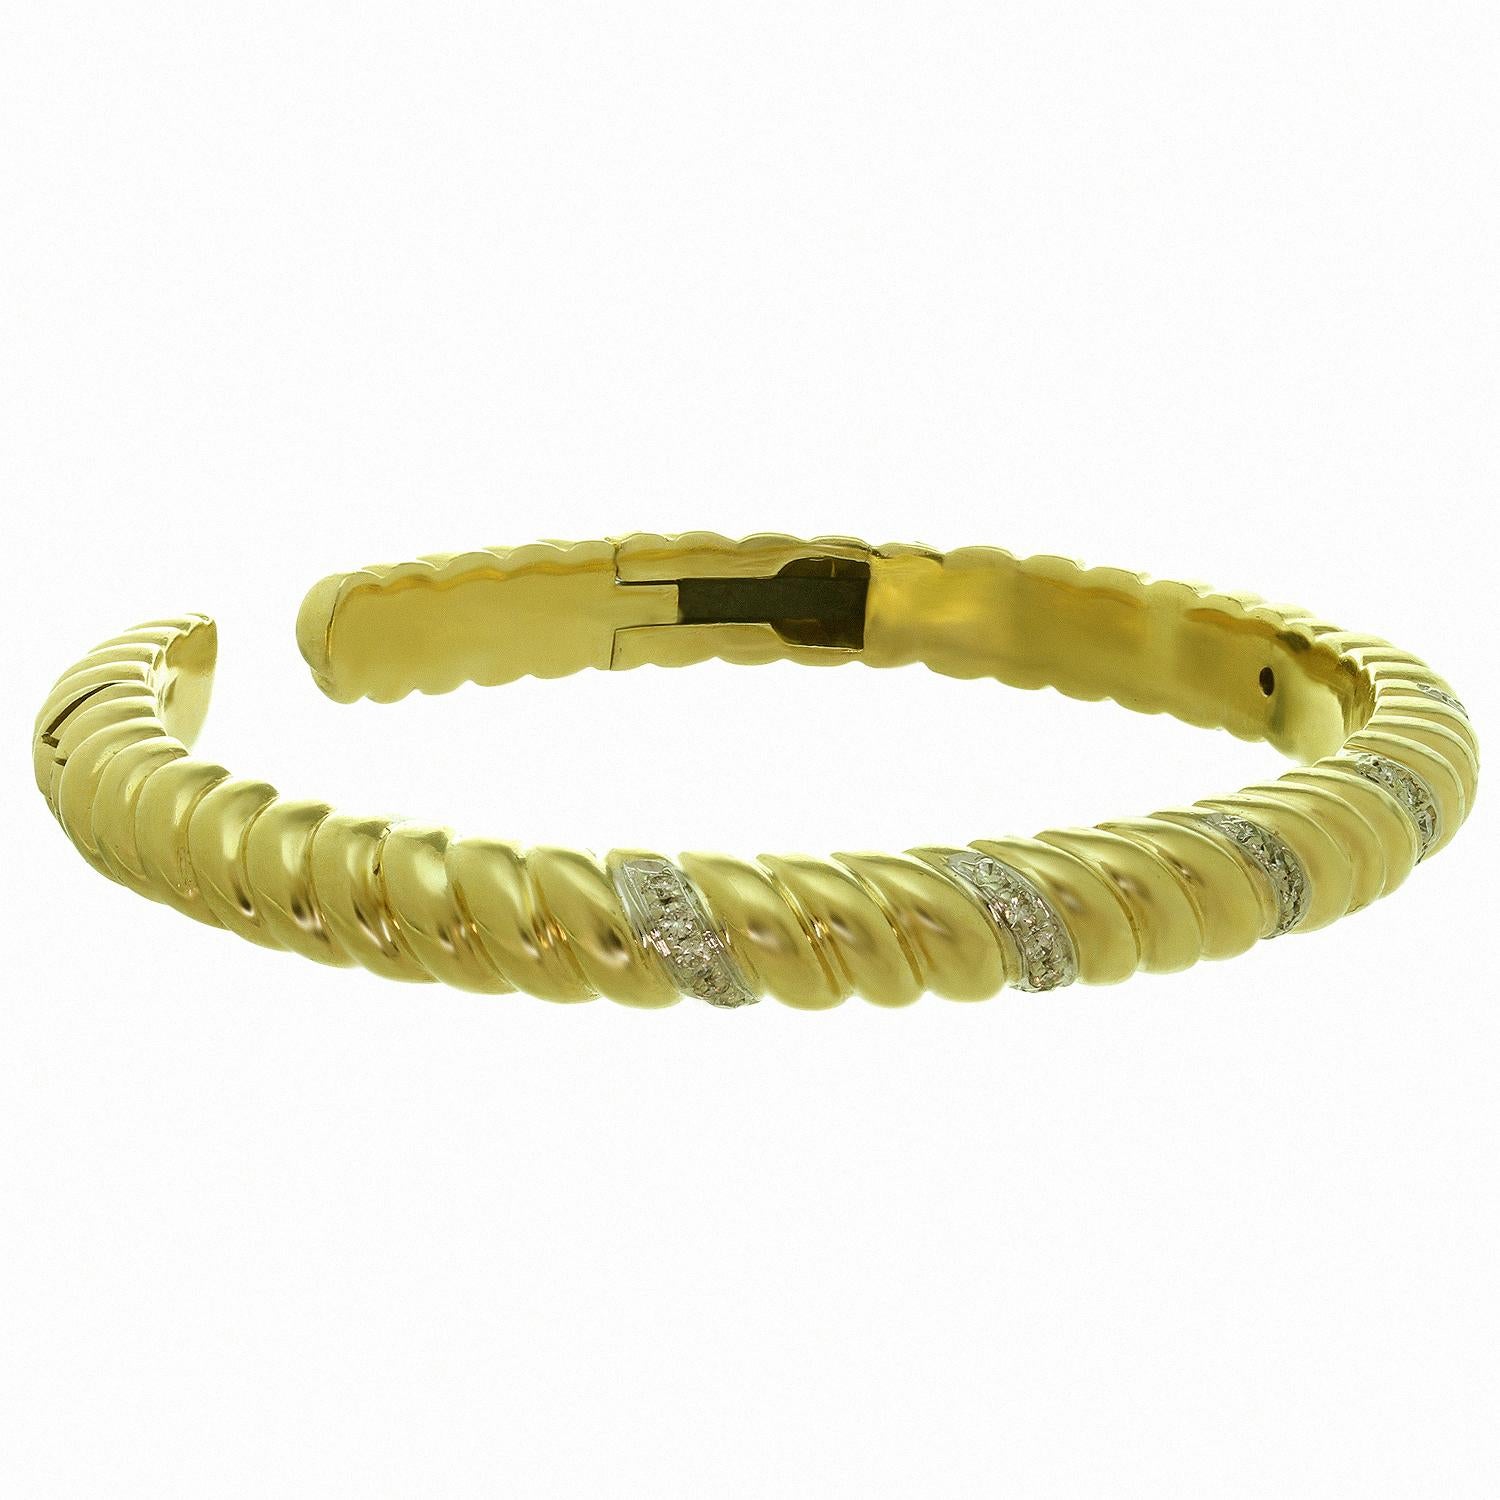 This classic vintage Van Cleef & Arpels hinged cuff bangle bracelet is crafted in 18k yellow gold and accented with brilliant-cut round G-H VS1-VS2 diamonds of an estimated 0.70 carats, set in white gold. Circa 1970s. Measurements: 0.23